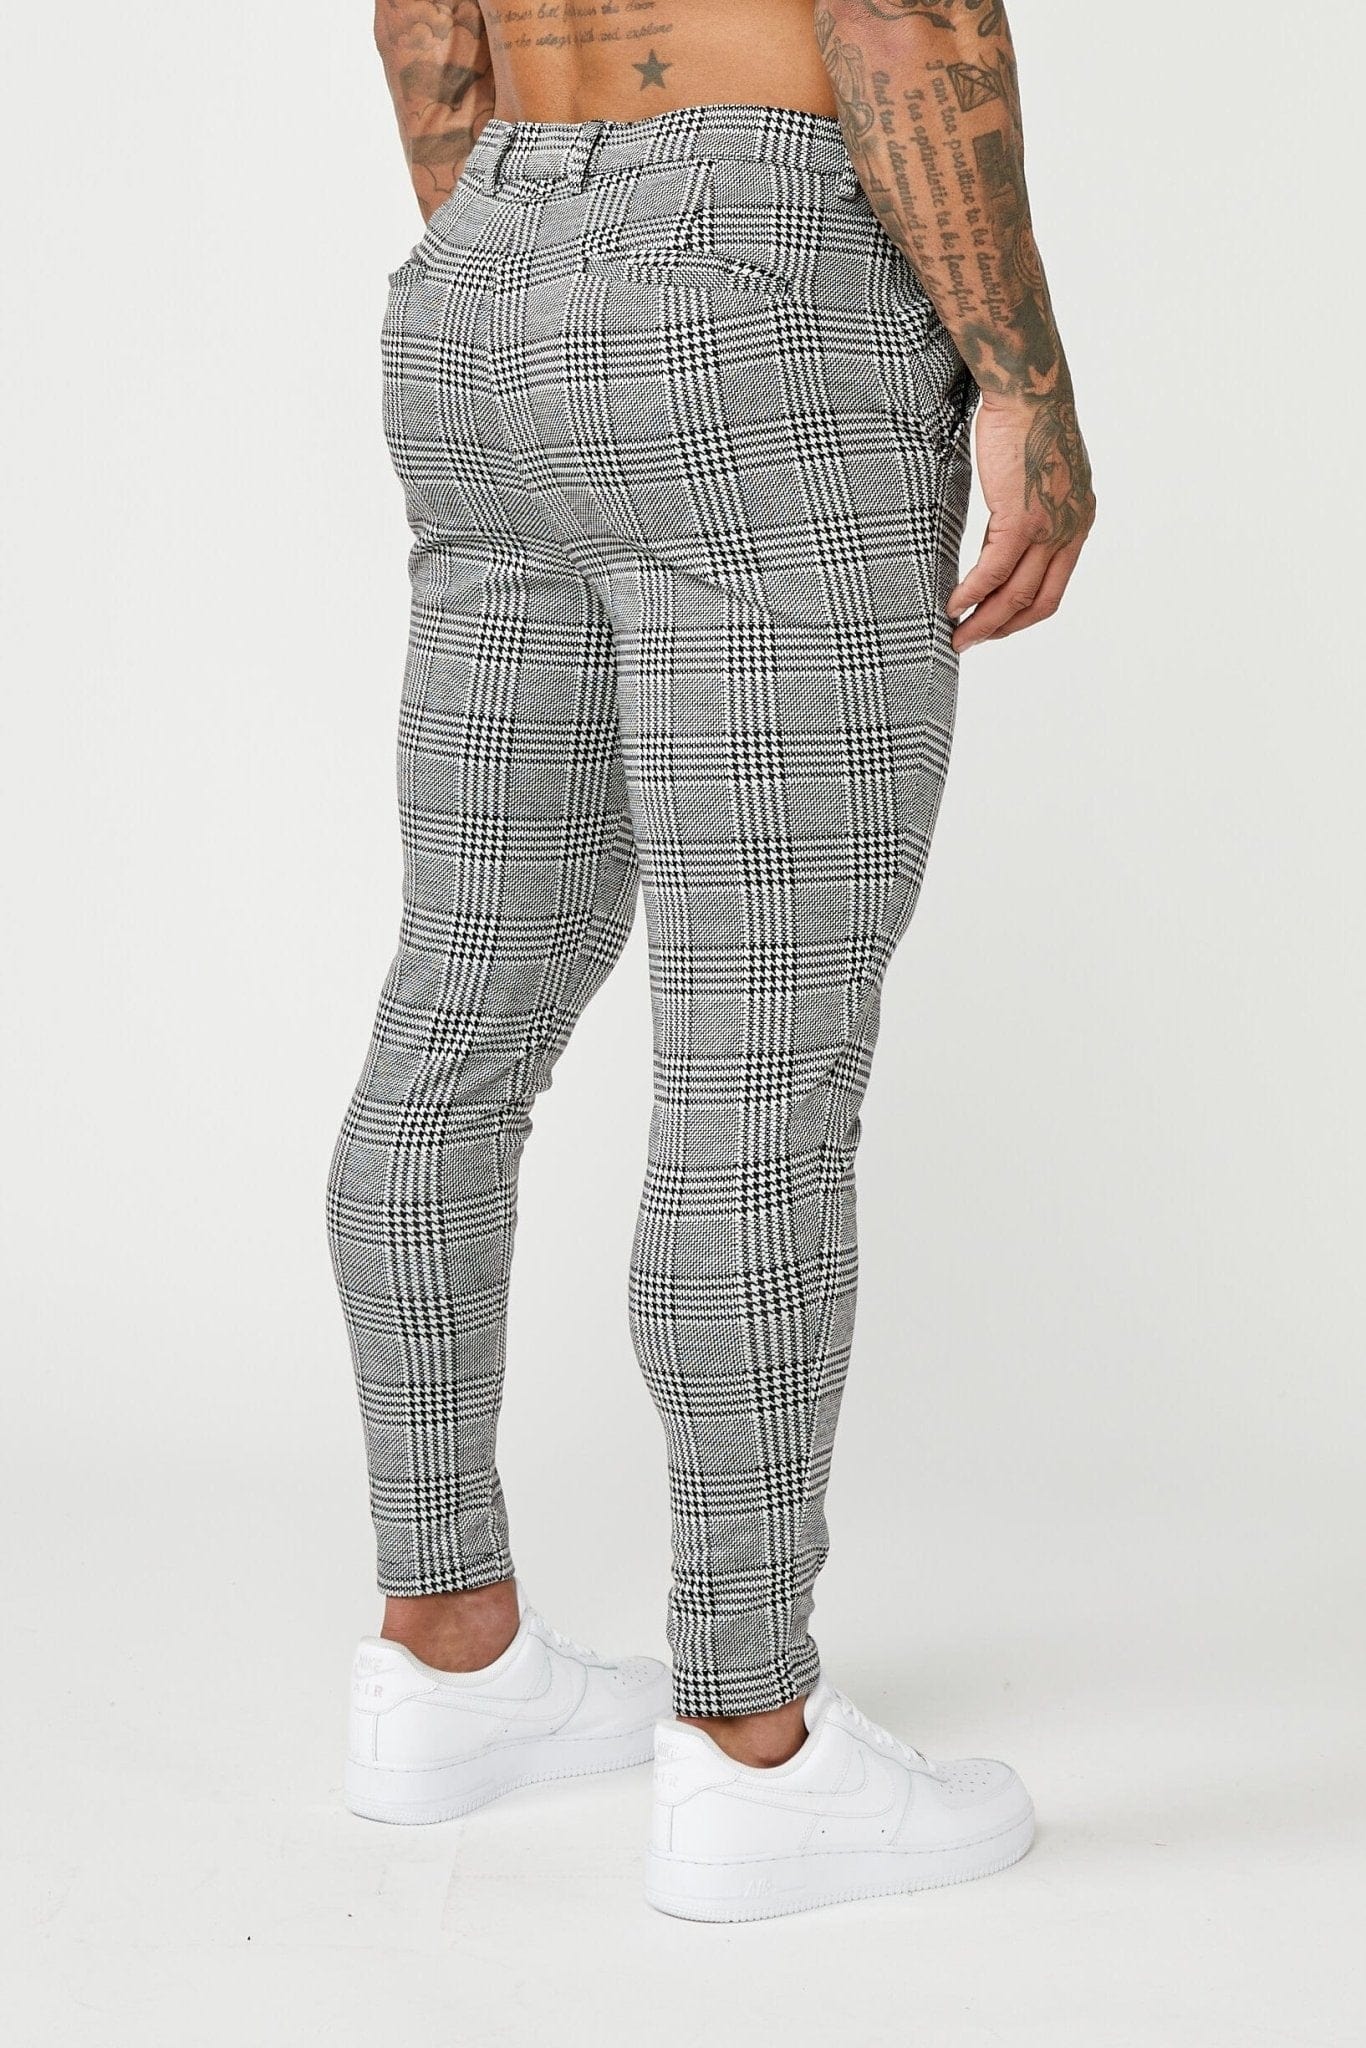 Leisure Trousers Wedding Workwear Breathable Mens Business Checked Formal  Pants | eBay